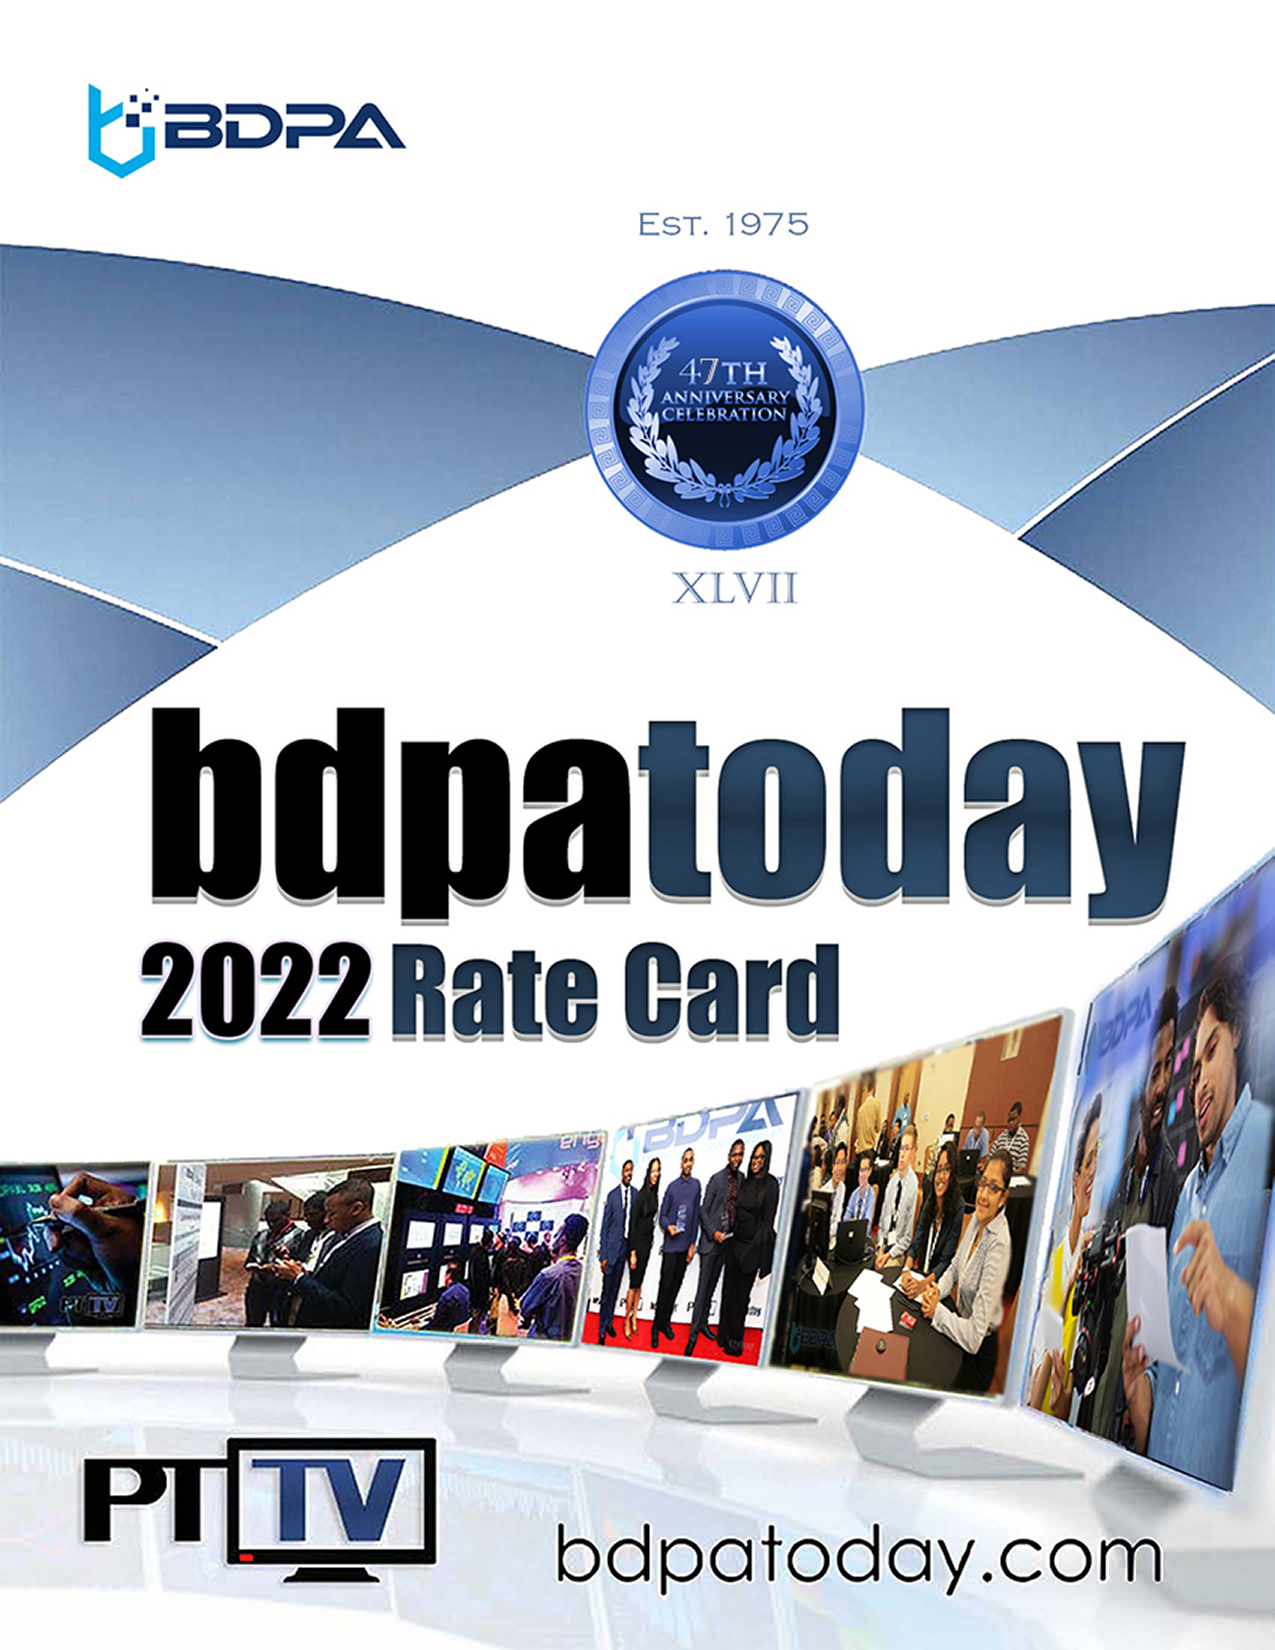 2022 Rate Schedules for PTTV and bdpatoday